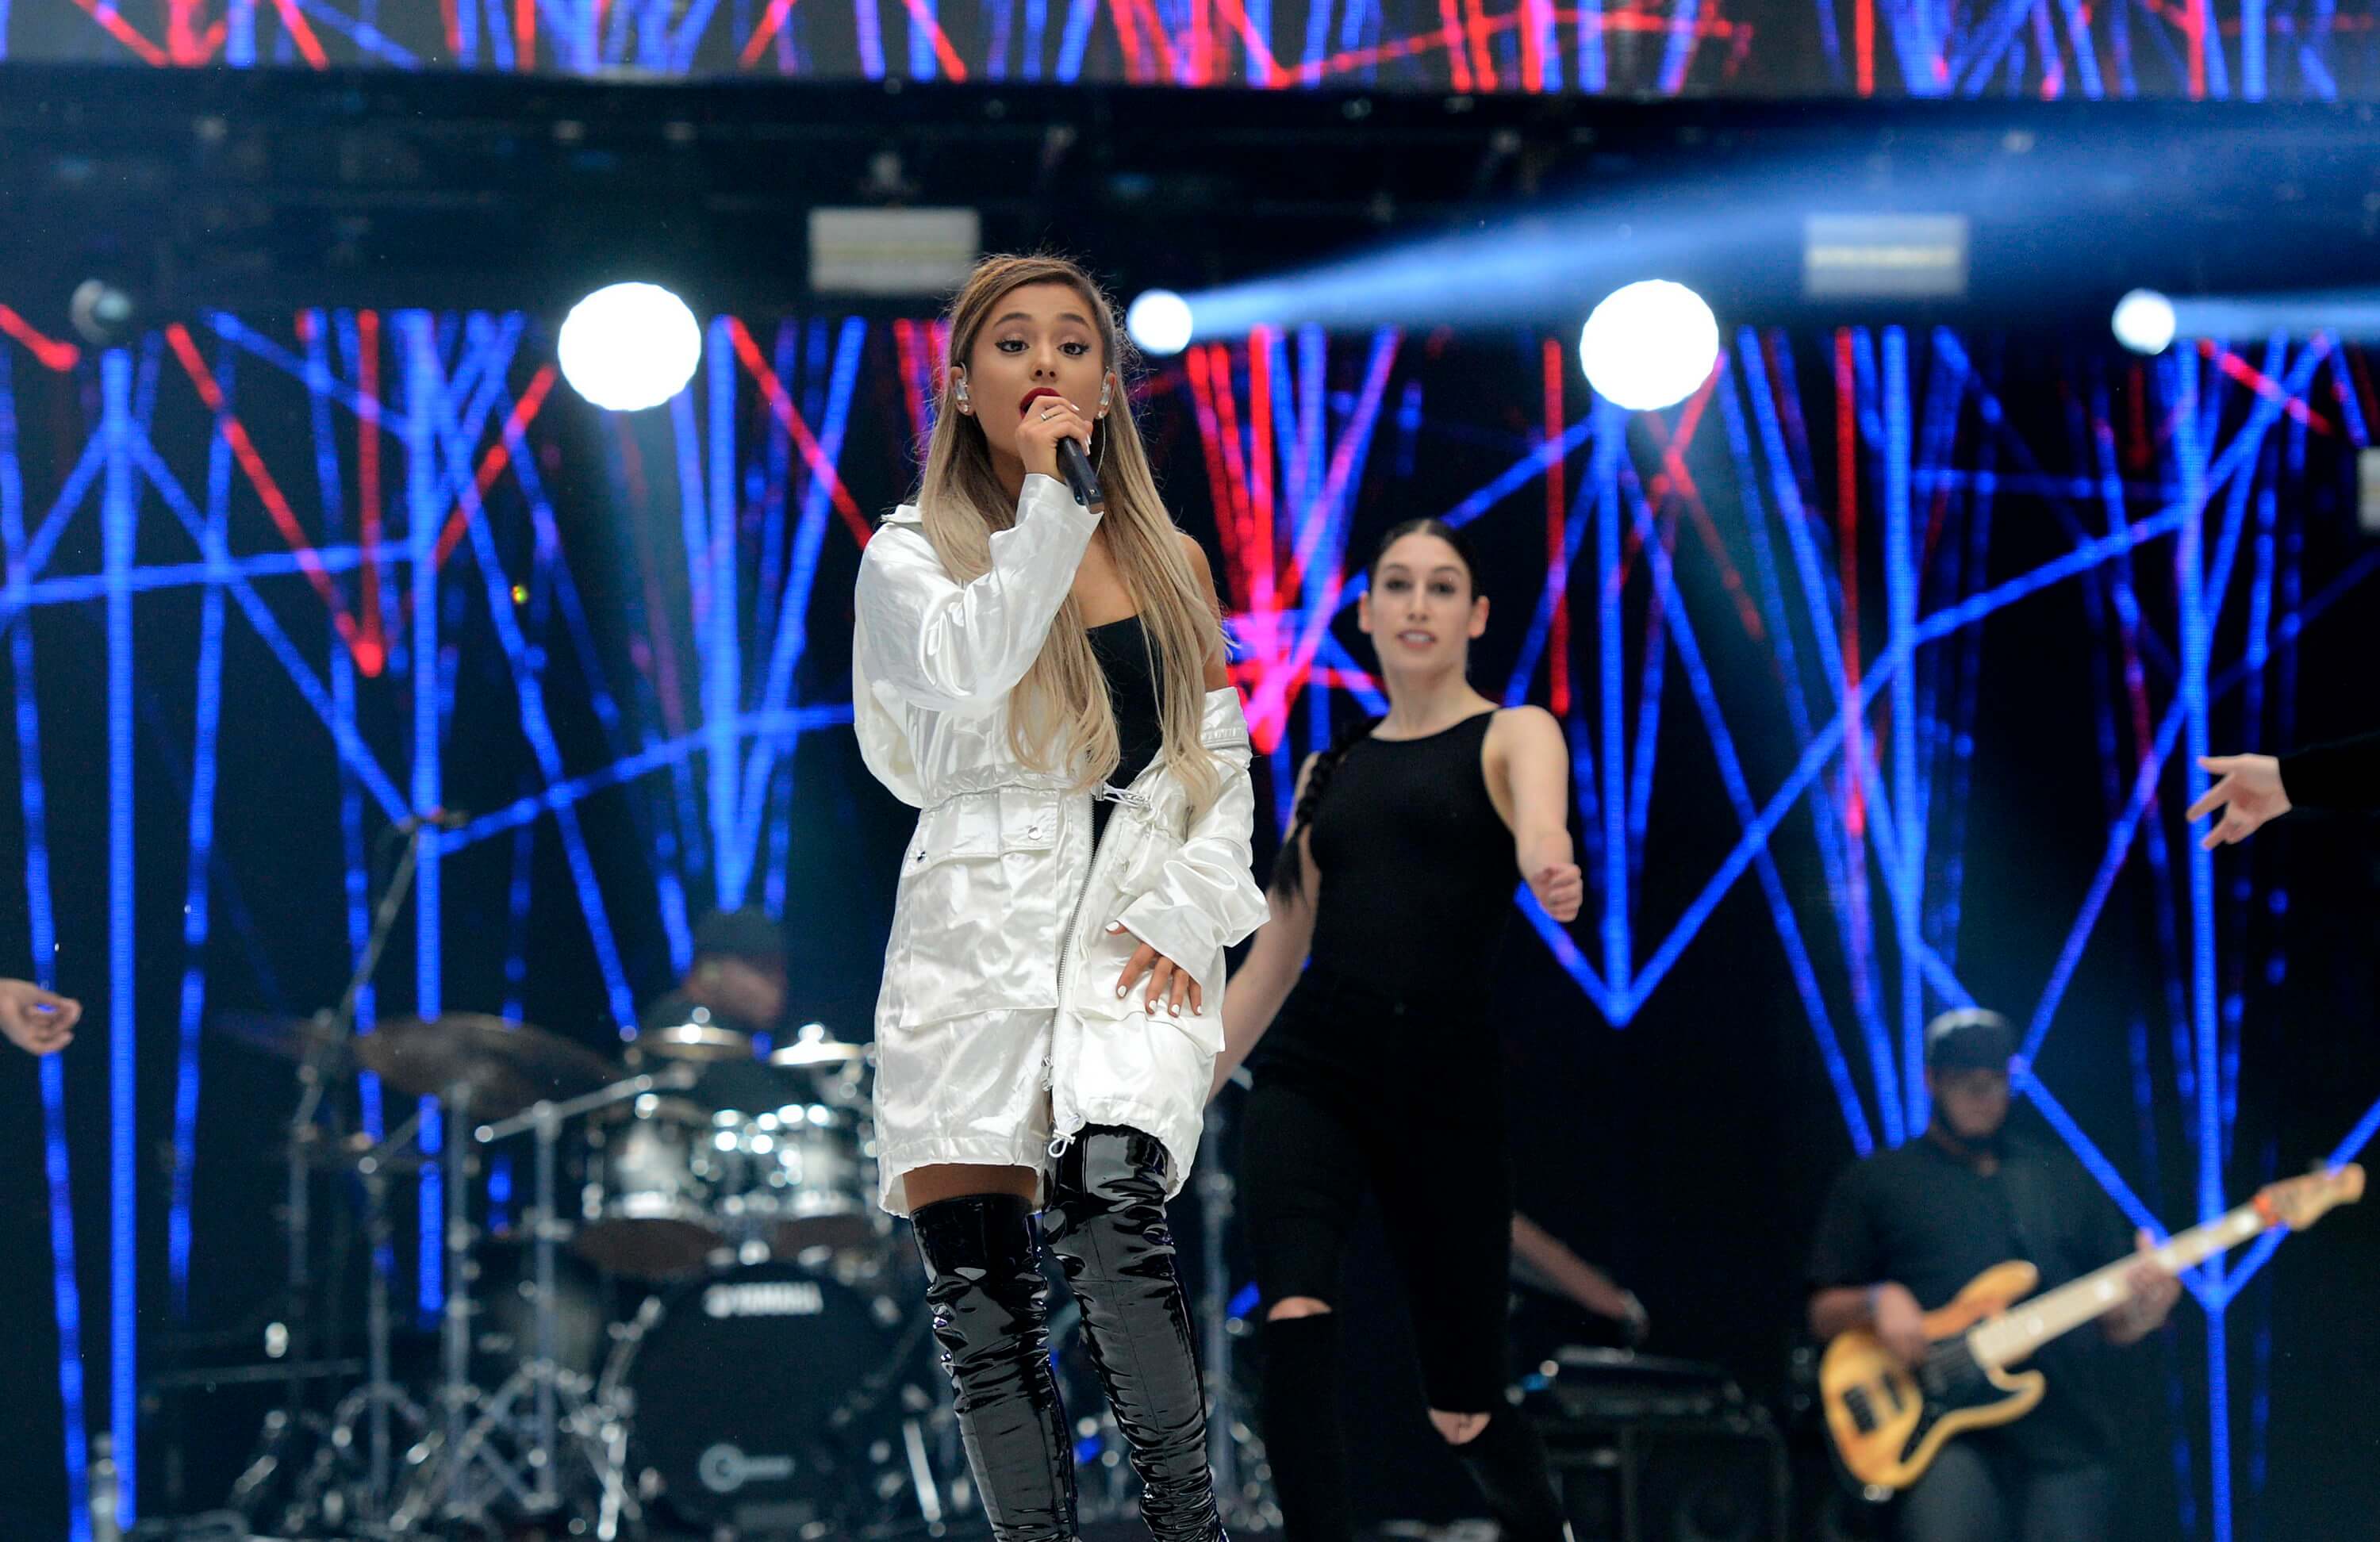 Ariana Grande performs at Capital FM Summertime Ball